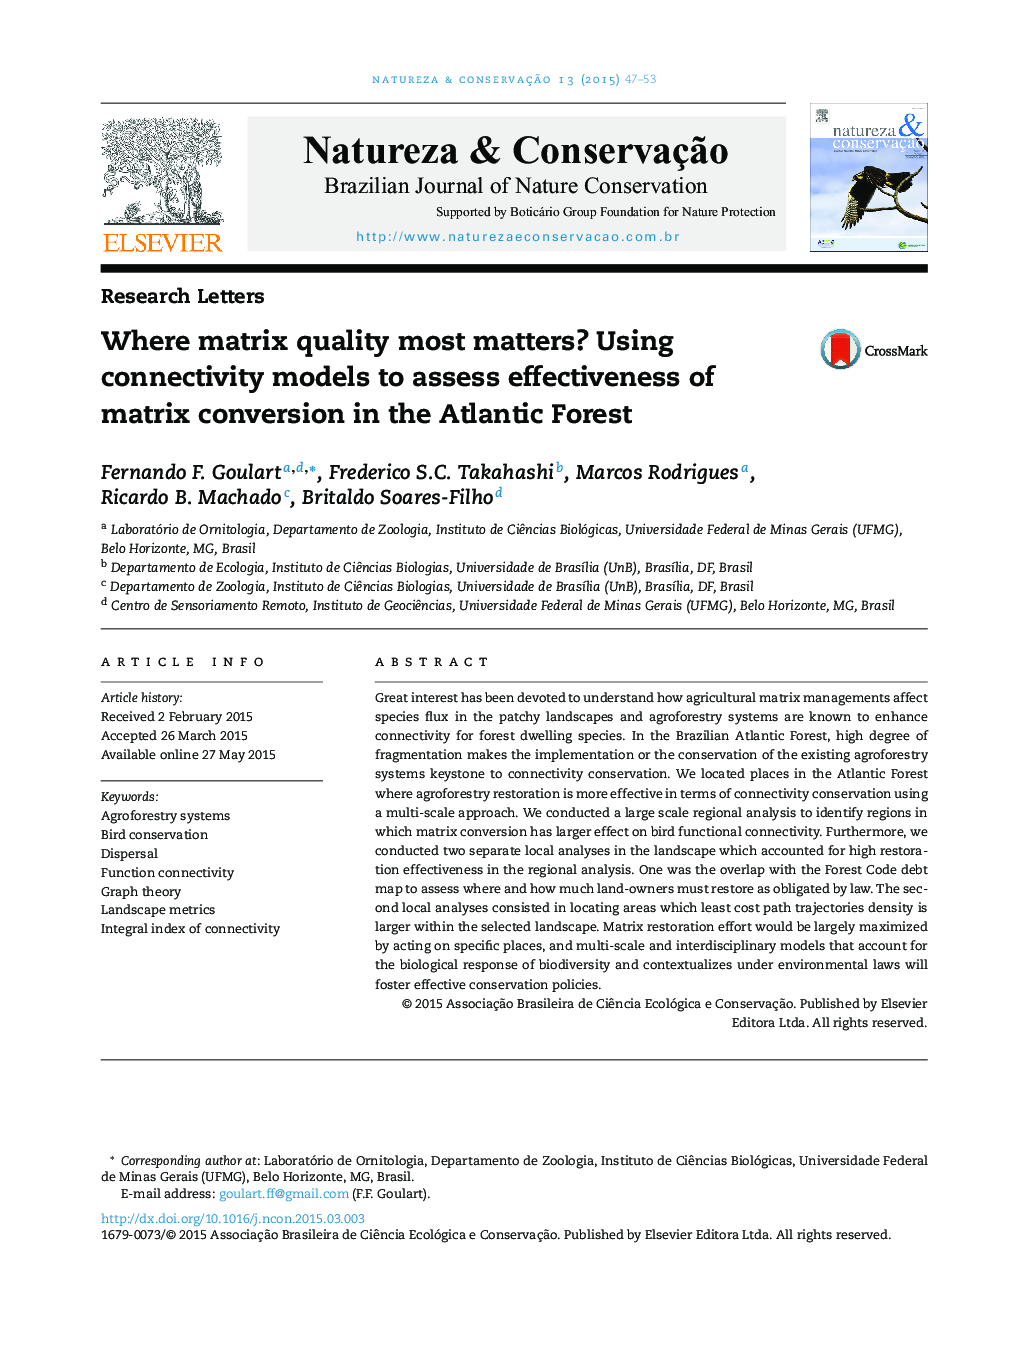 Where matrix quality most matters? Using connectivity models to assess effectiveness of matrix conversion in the Atlantic Forest